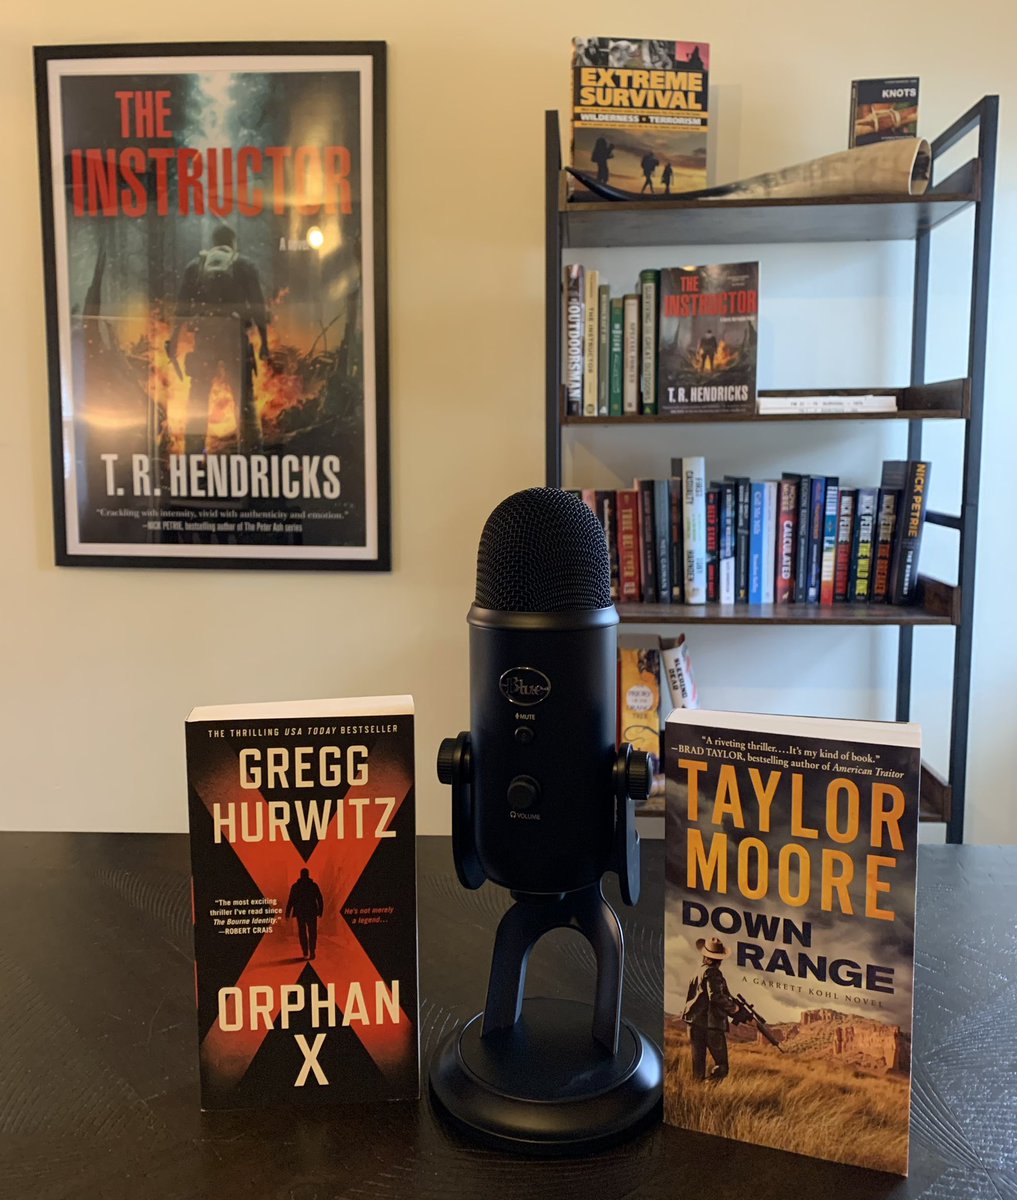 Yesterday’s additions and upgrade:

#amwriting #thriller #thrillerbooks #thrillers #amreading #ITWDebuts #WritingCommunity #podcast #amreadingthrillers #podcasts #veteran #veterans #veteranauthor #veteranauthors #podcasting #BookTwitter #bookreview #TheInstructor